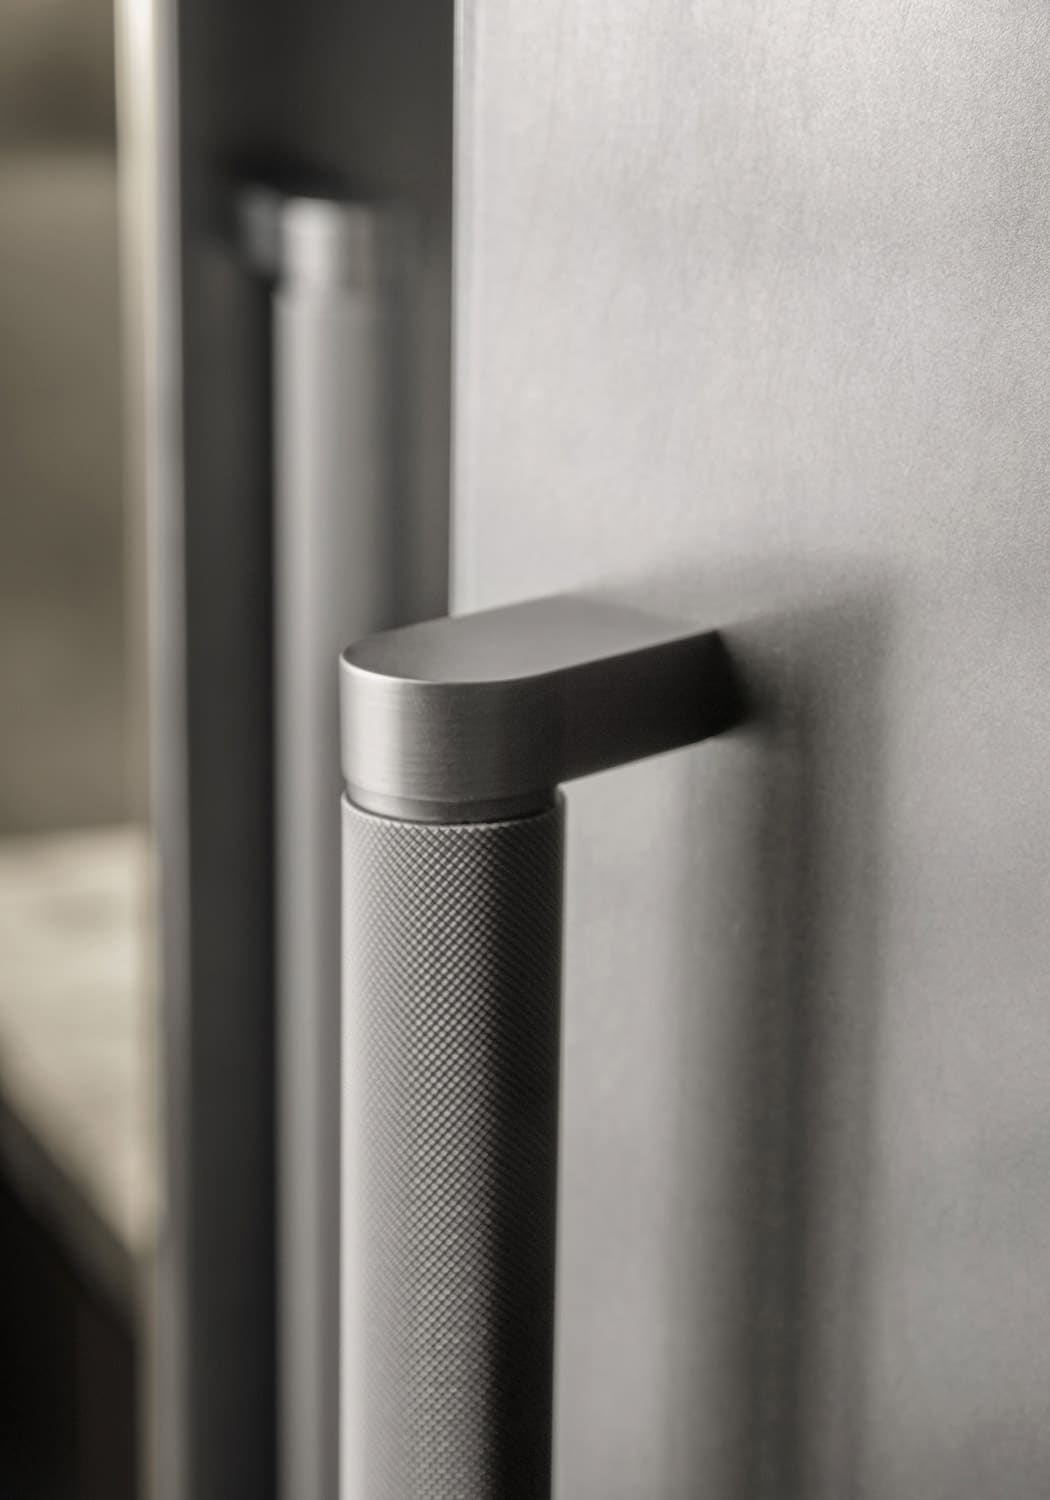 Tubular handles with engraved grip in nickel finish were used for the heavier cabinet doors.